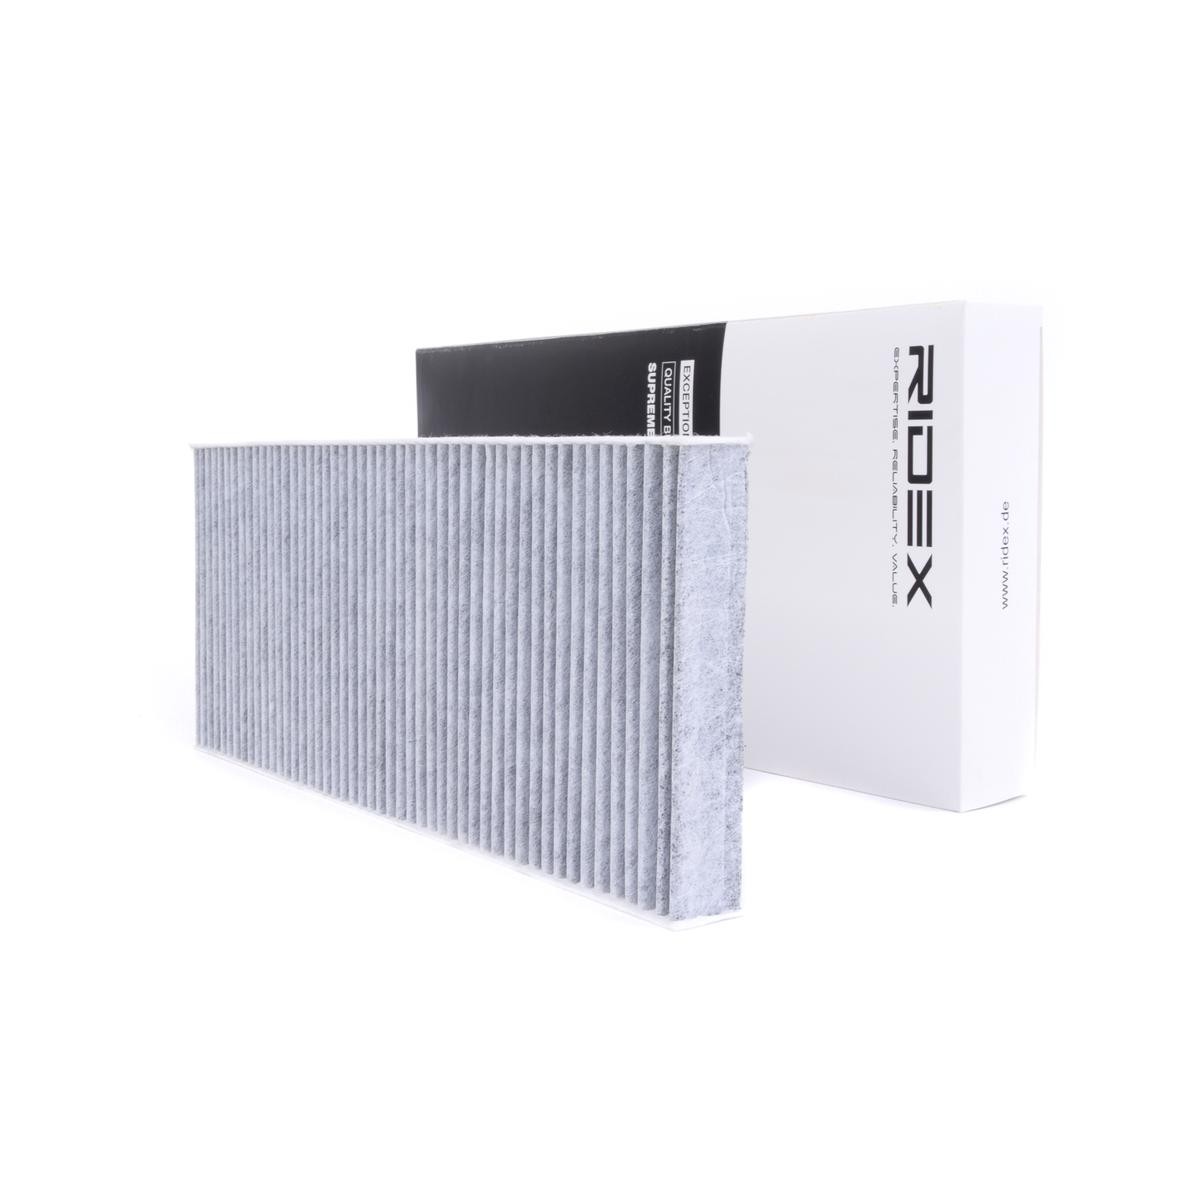 RIDEX Activated Carbon Filter, 405 mm x 166 mm x 32 mm Width: 166mm, Height: 32mm, Length: 405mm Cabin filter 424I0208 buy